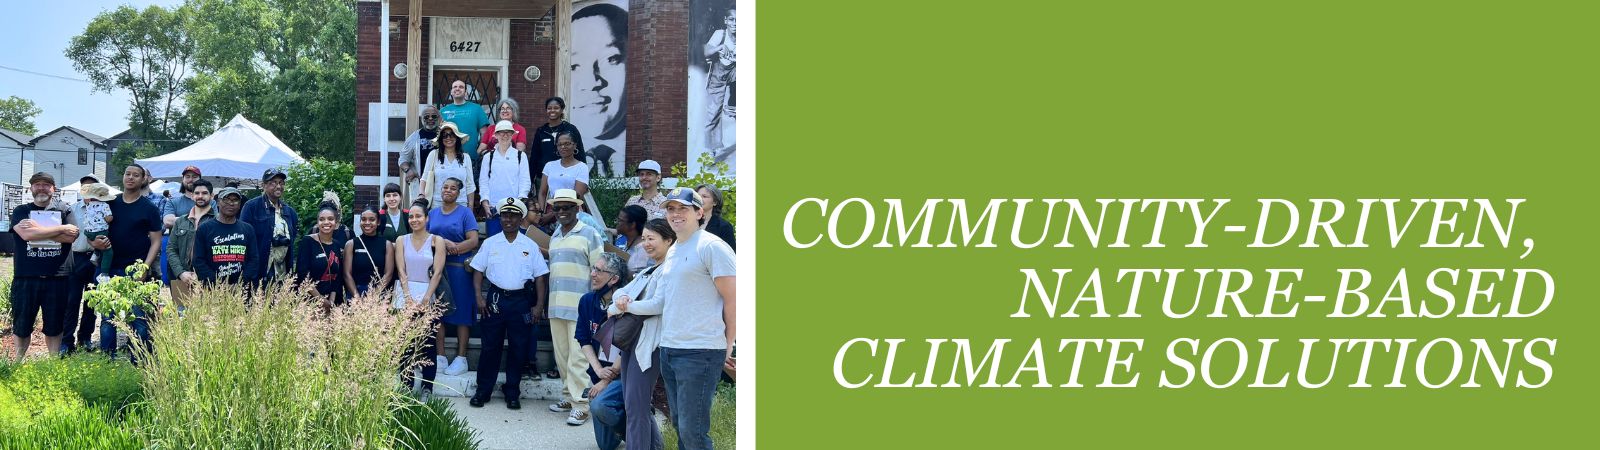 Community-driven, nature-based climate solutions